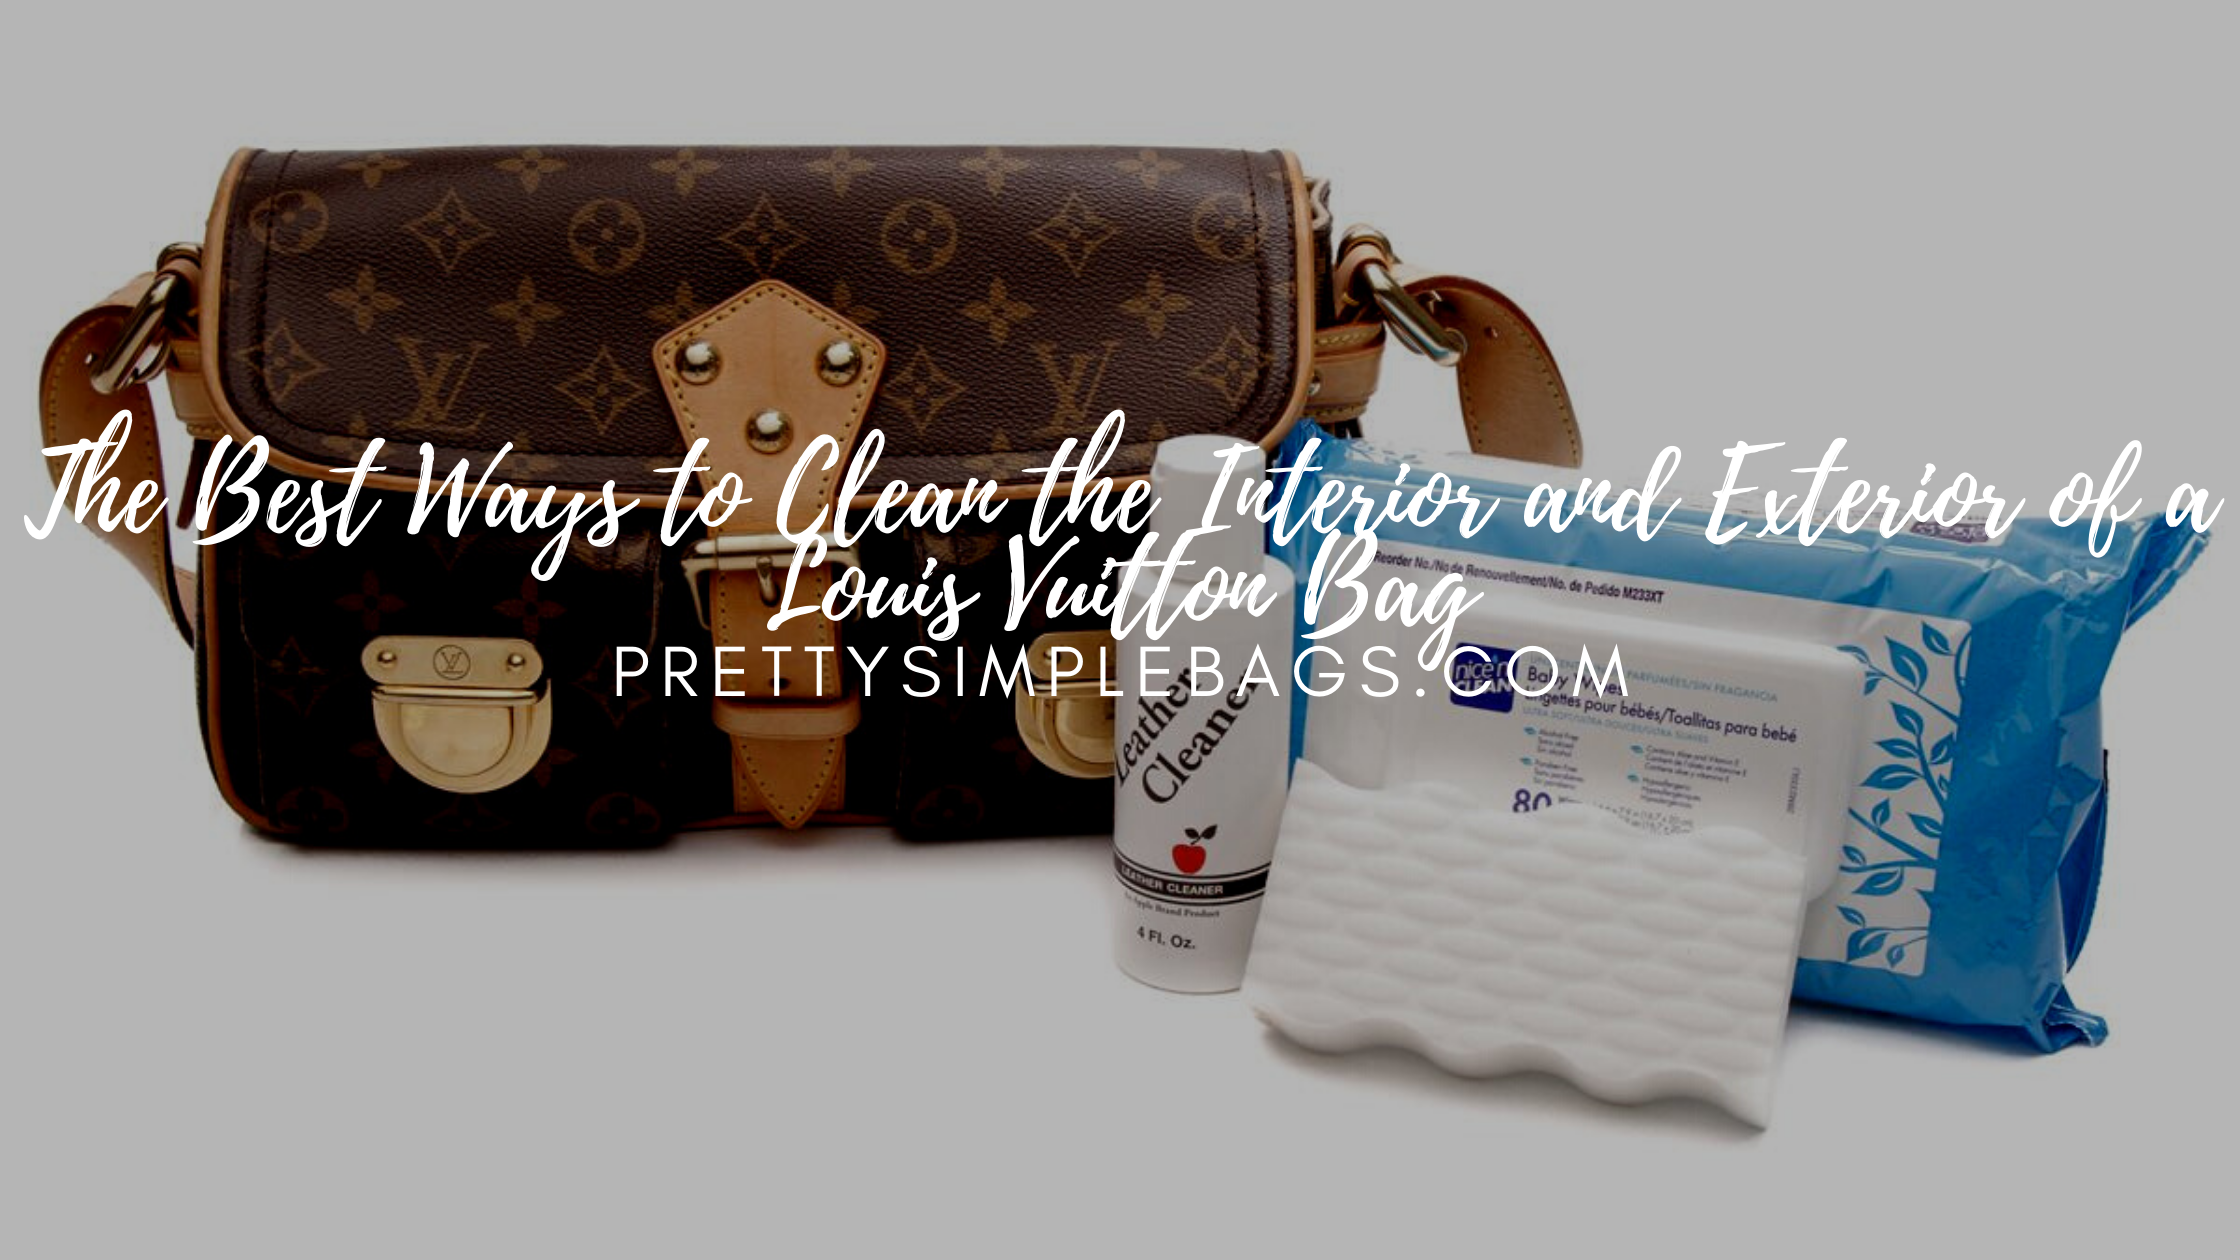 The Best Ways to Clean the Interior and Exterior of a Louis Vuitton Bag